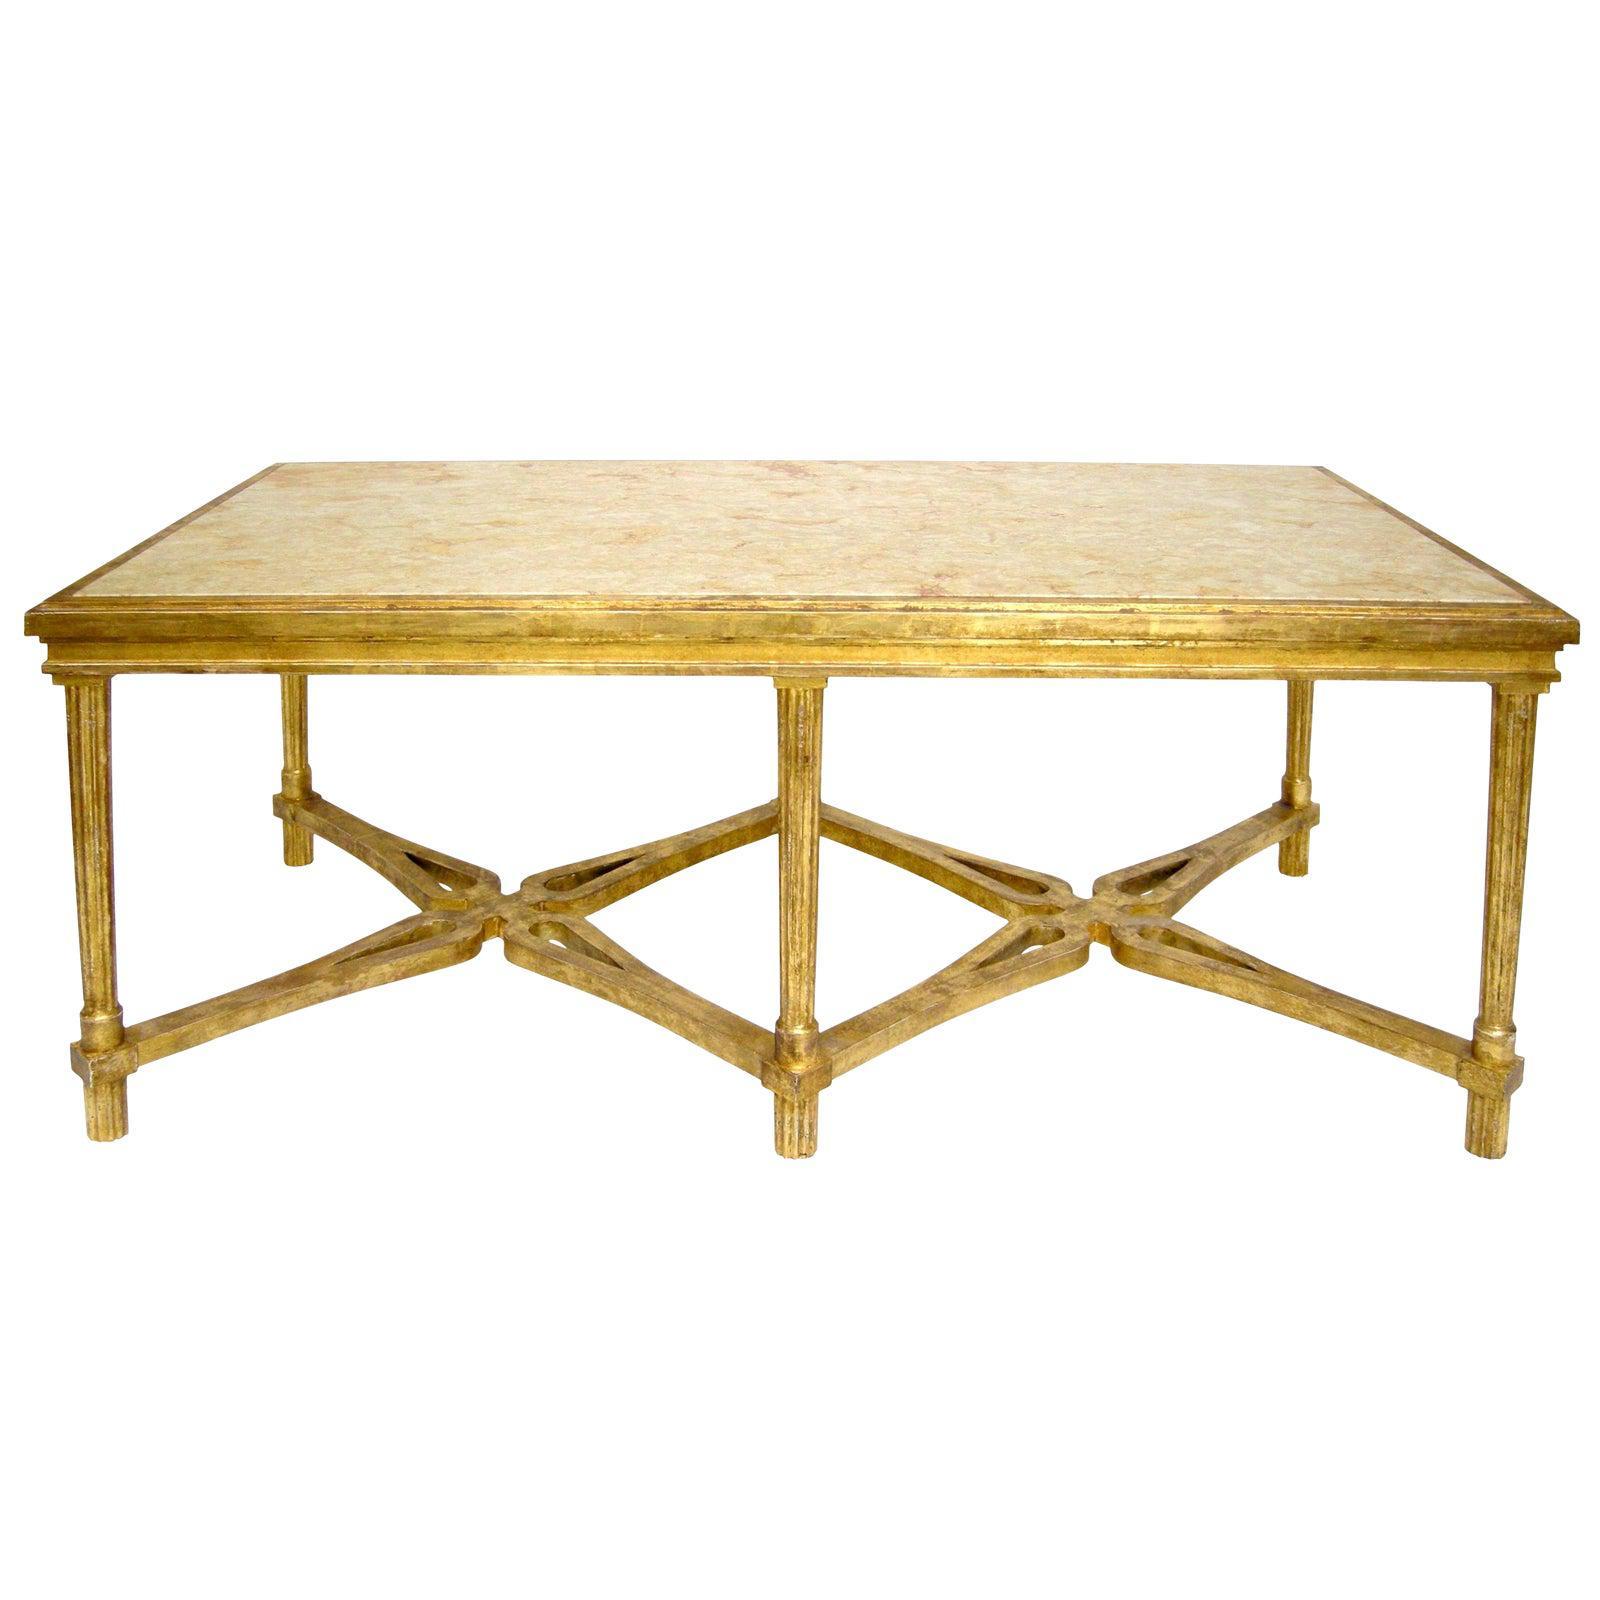 Regency style giltwood designer Marbella coffee table.
​Note: Custom orders require a deposit and cannot be canceled.  All custom order deposits are non-refundable.  